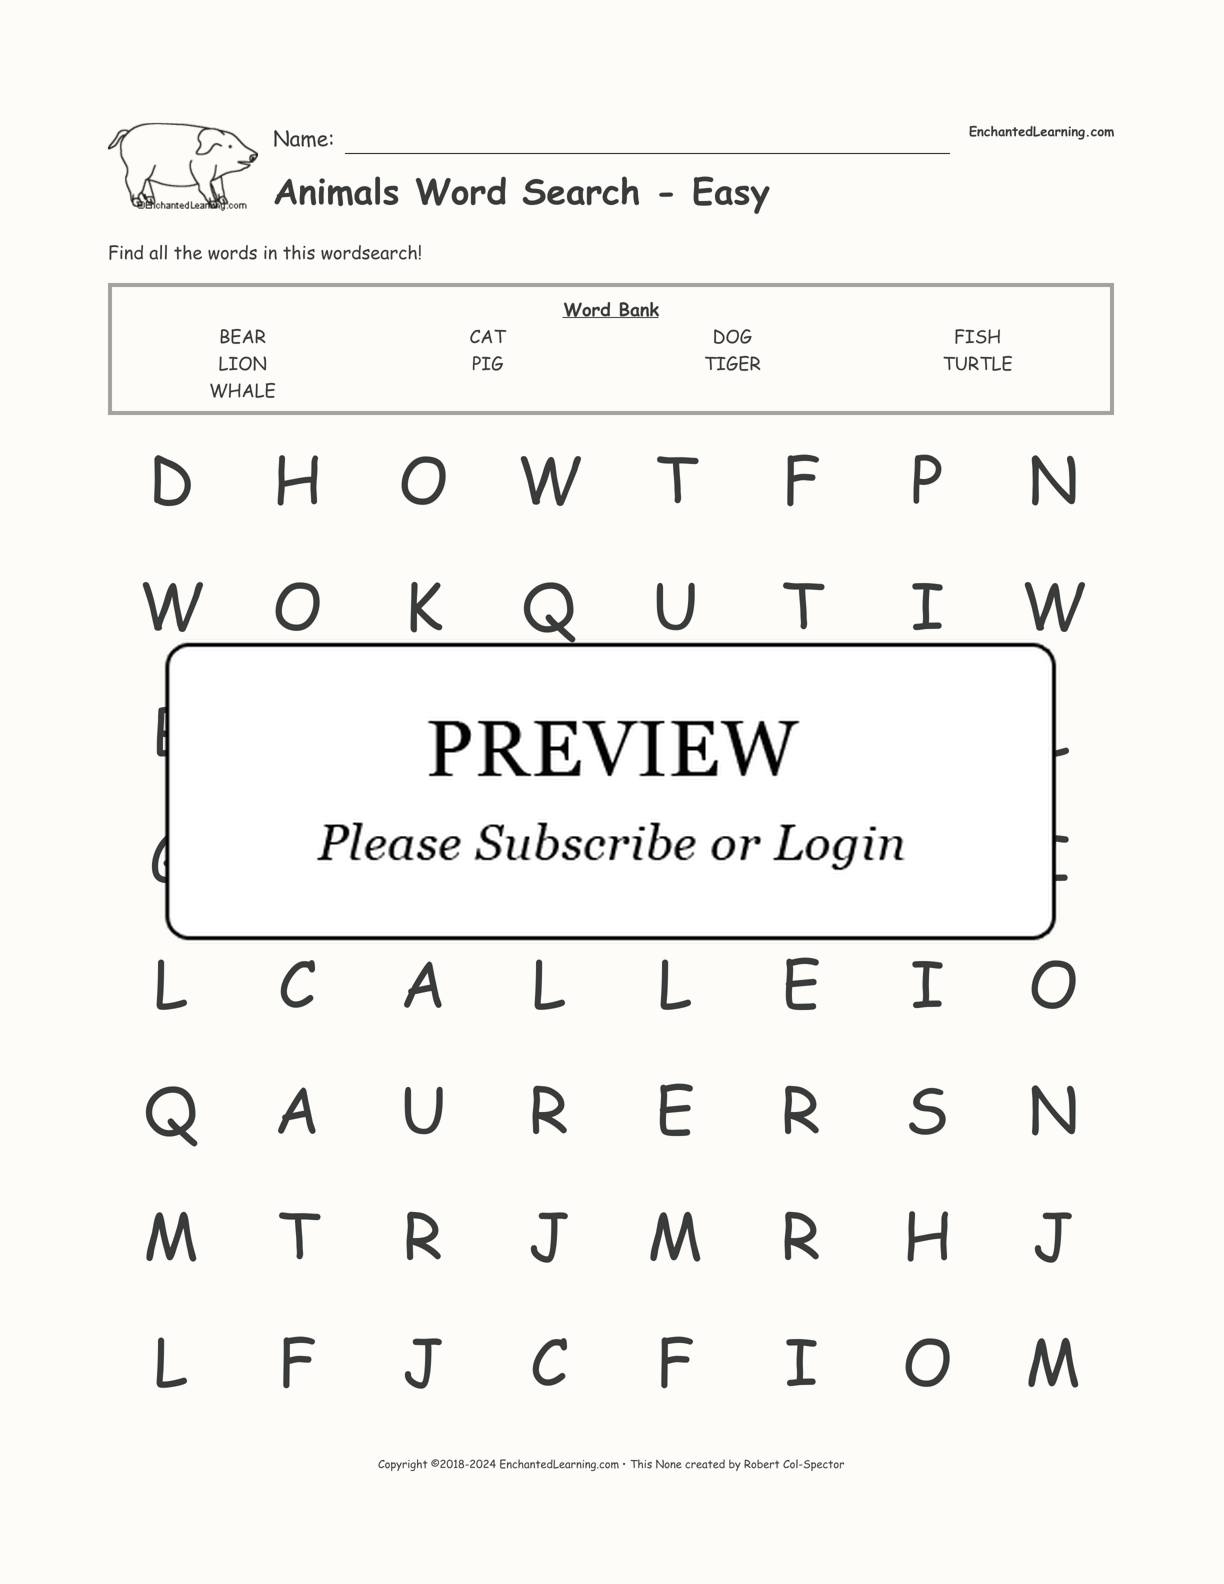 Animals Word Search - Easy interactive worksheet page 1